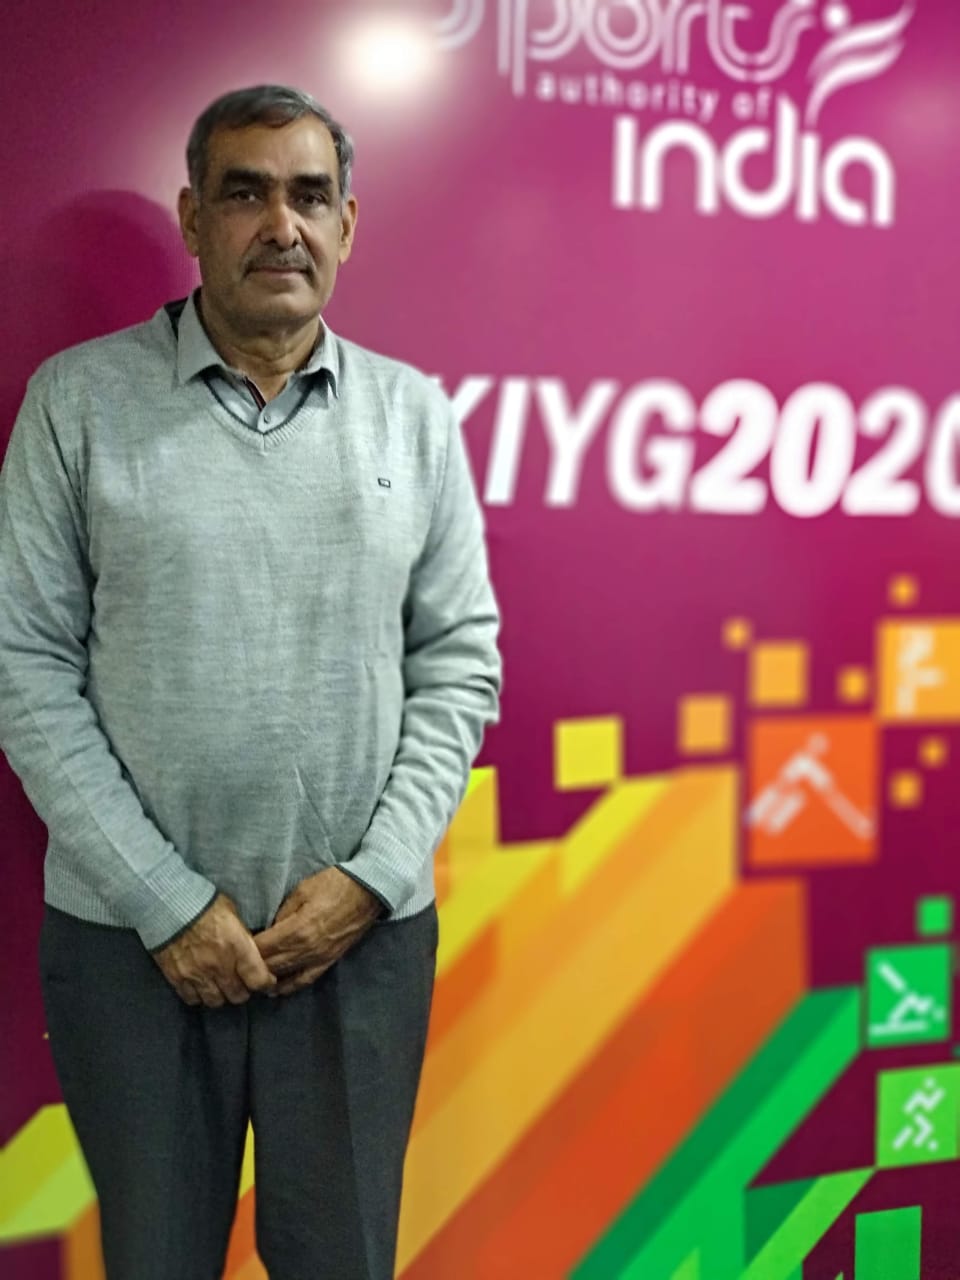 Khelo India Youth Games | Private entities have to come forward and help upcoming athletes, feels Rambir Singh Khokhar